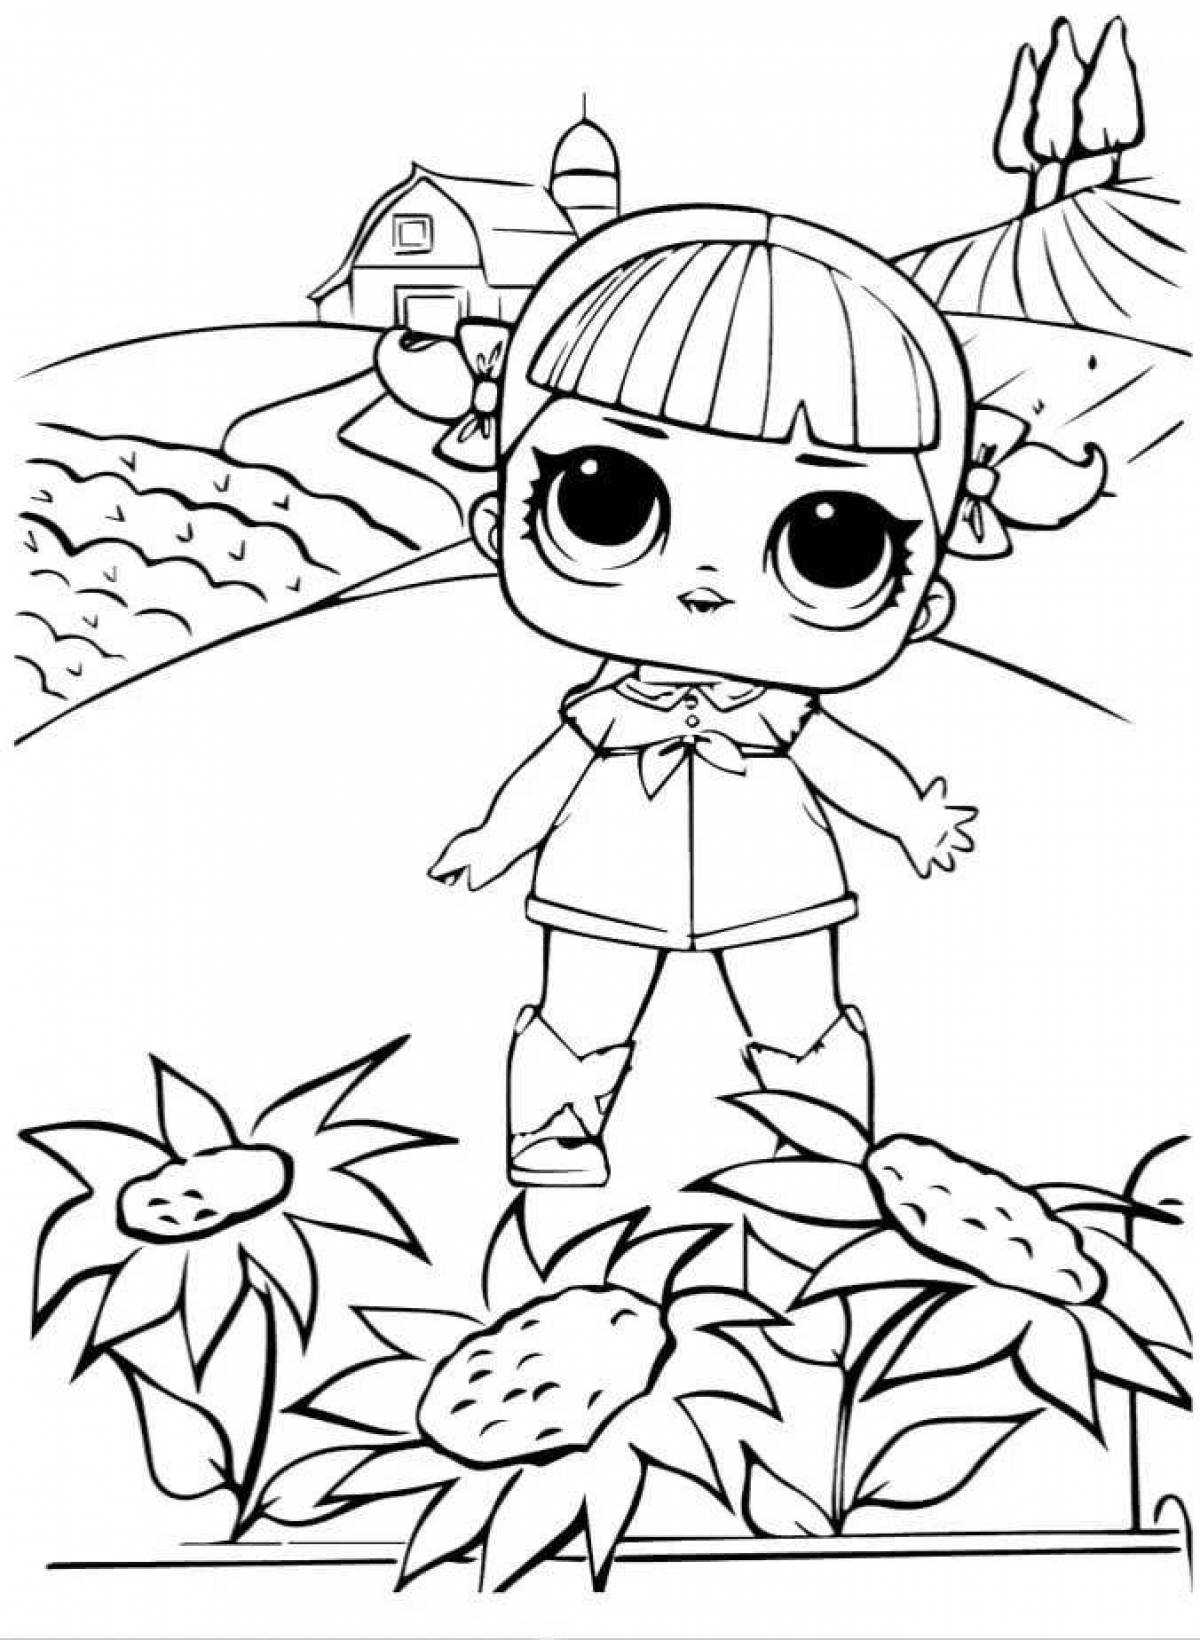 Coloring book for girls doll lol #5